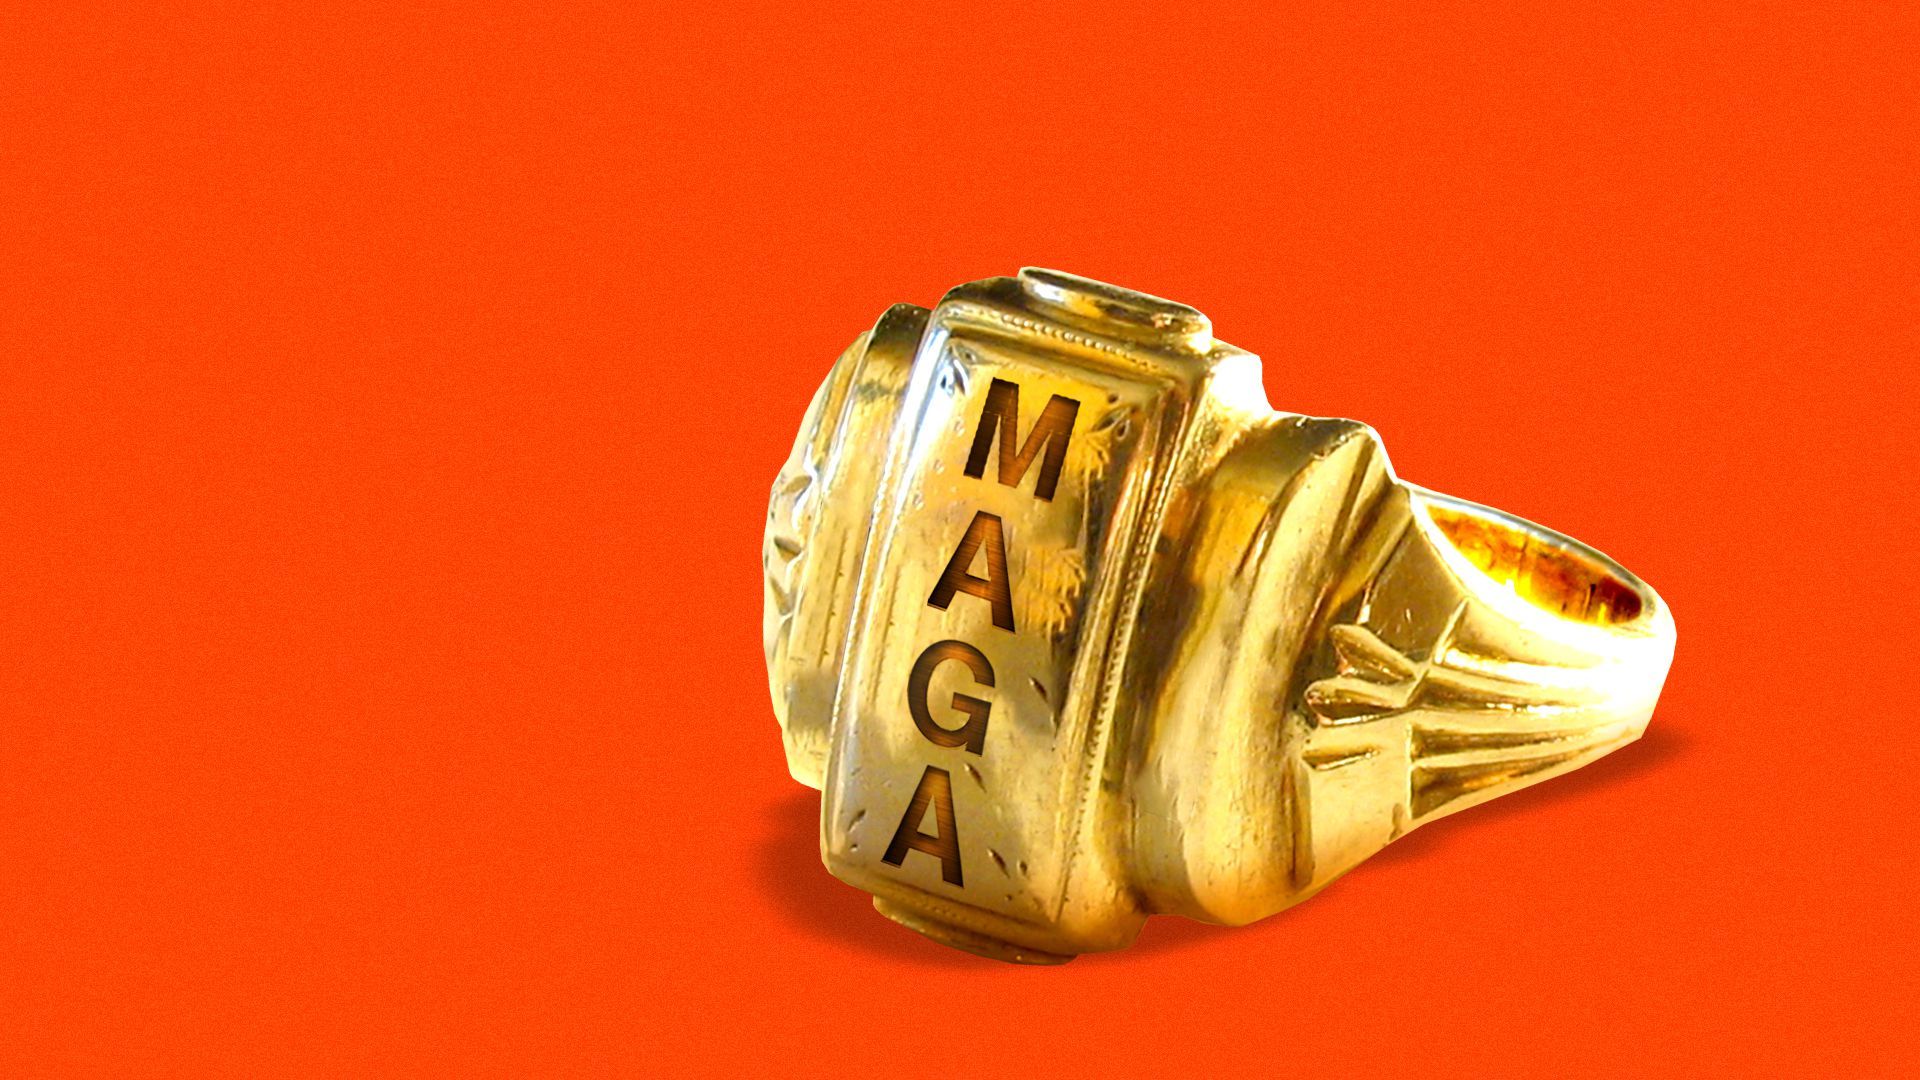 Illustration of a gold ring with MAGA engraved on the front